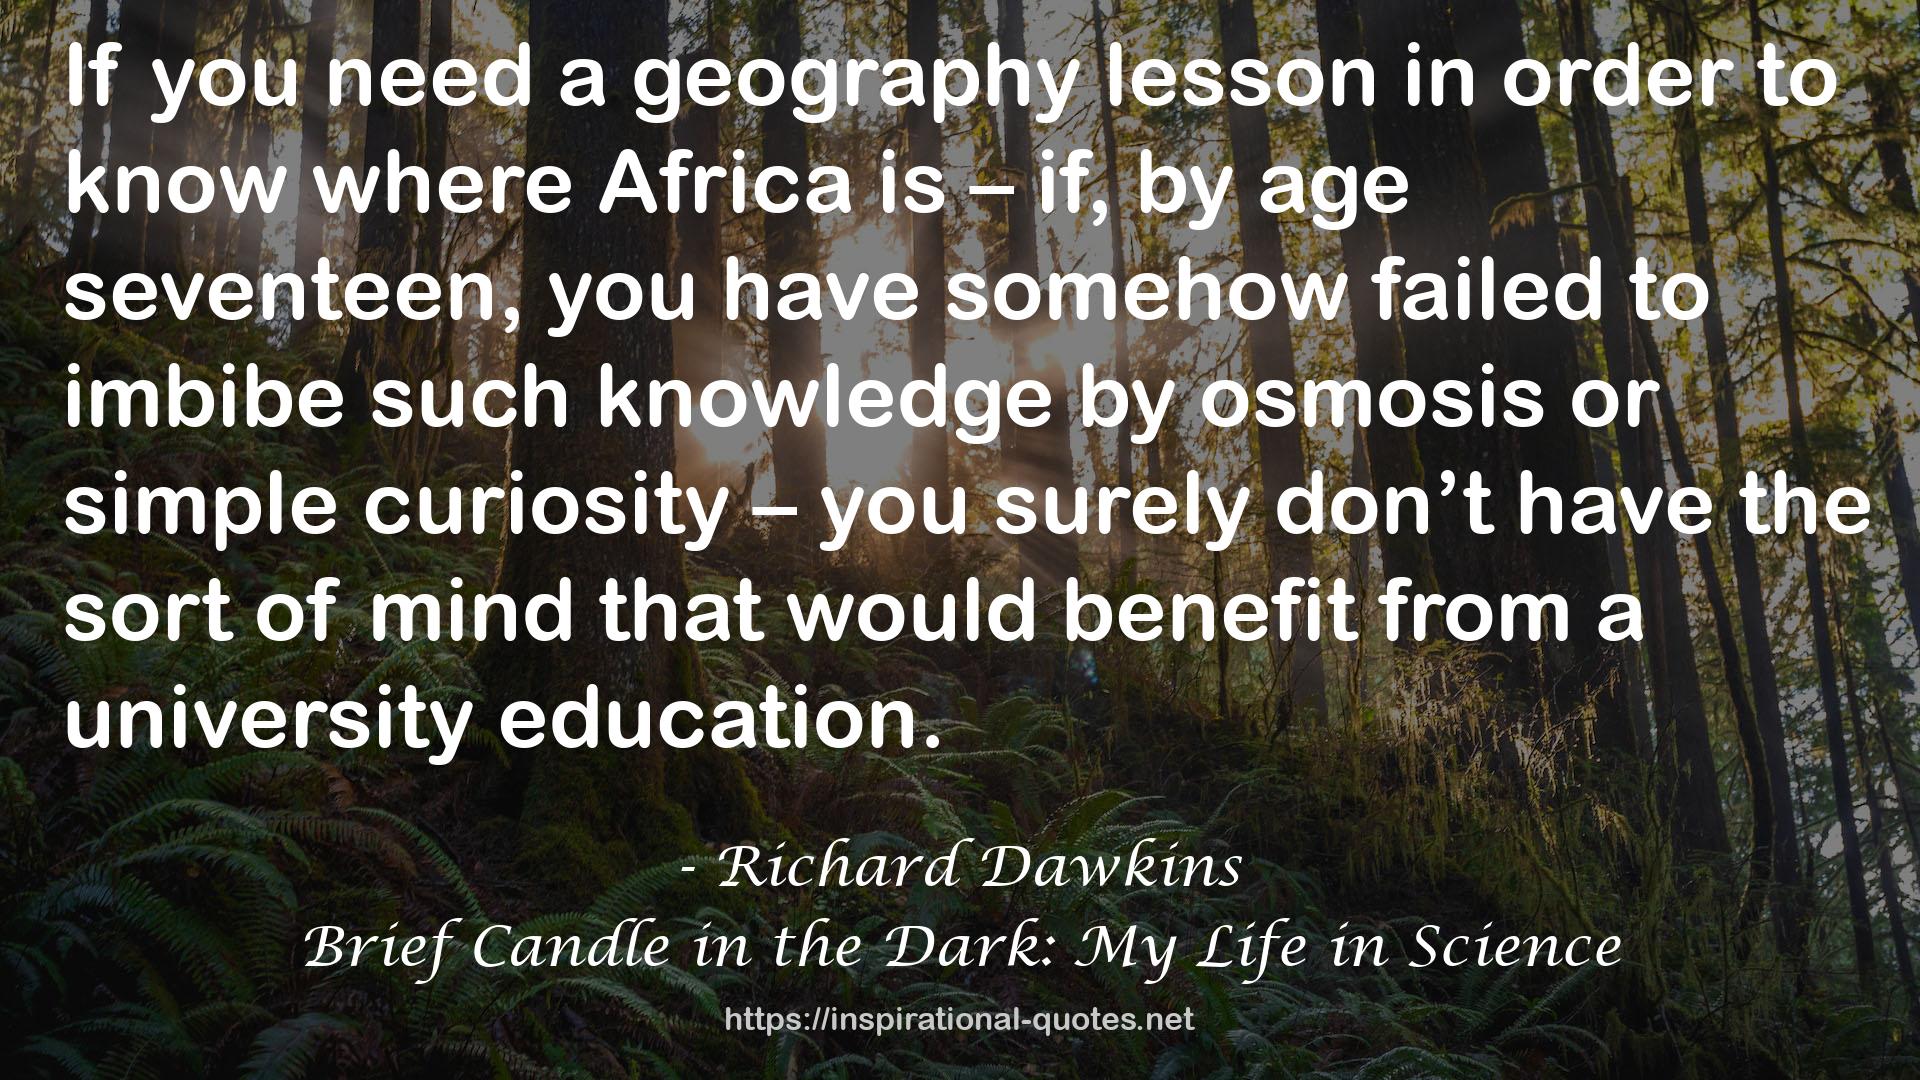 Brief Candle in the Dark: My Life in Science QUOTES